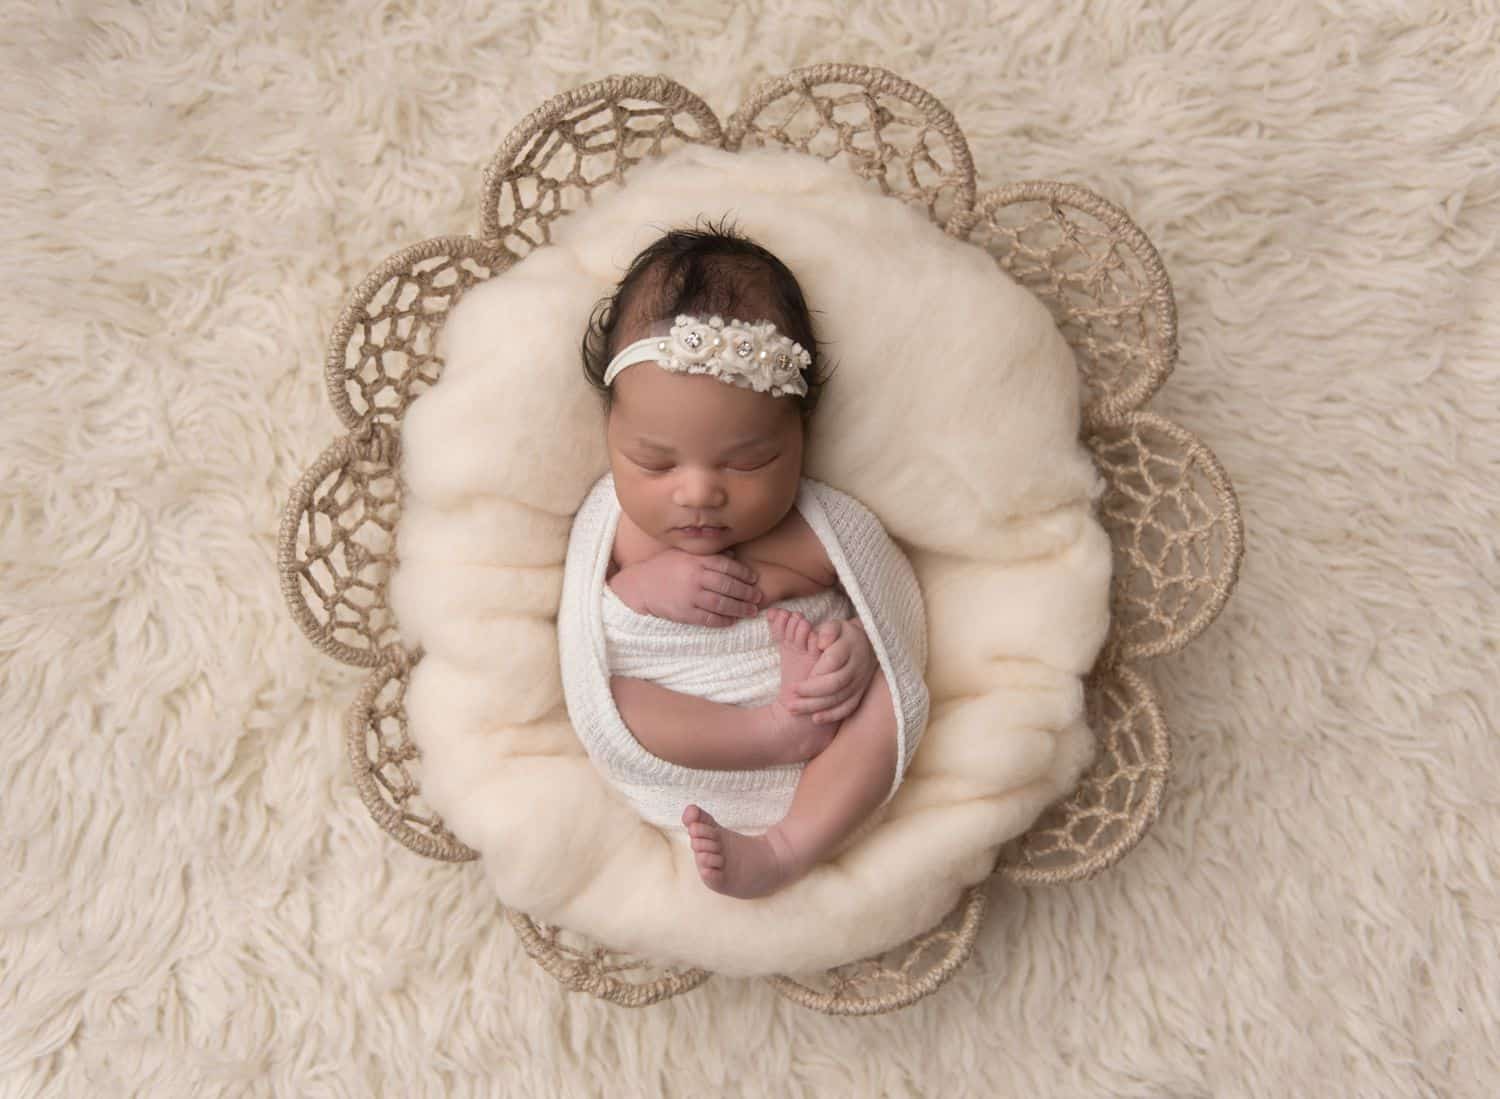 Photographers who specialize are now the gold standard for clients wanting the best newborn photographs, wedding photographs, and more. Here's why. (Featuring Chaya Braun)